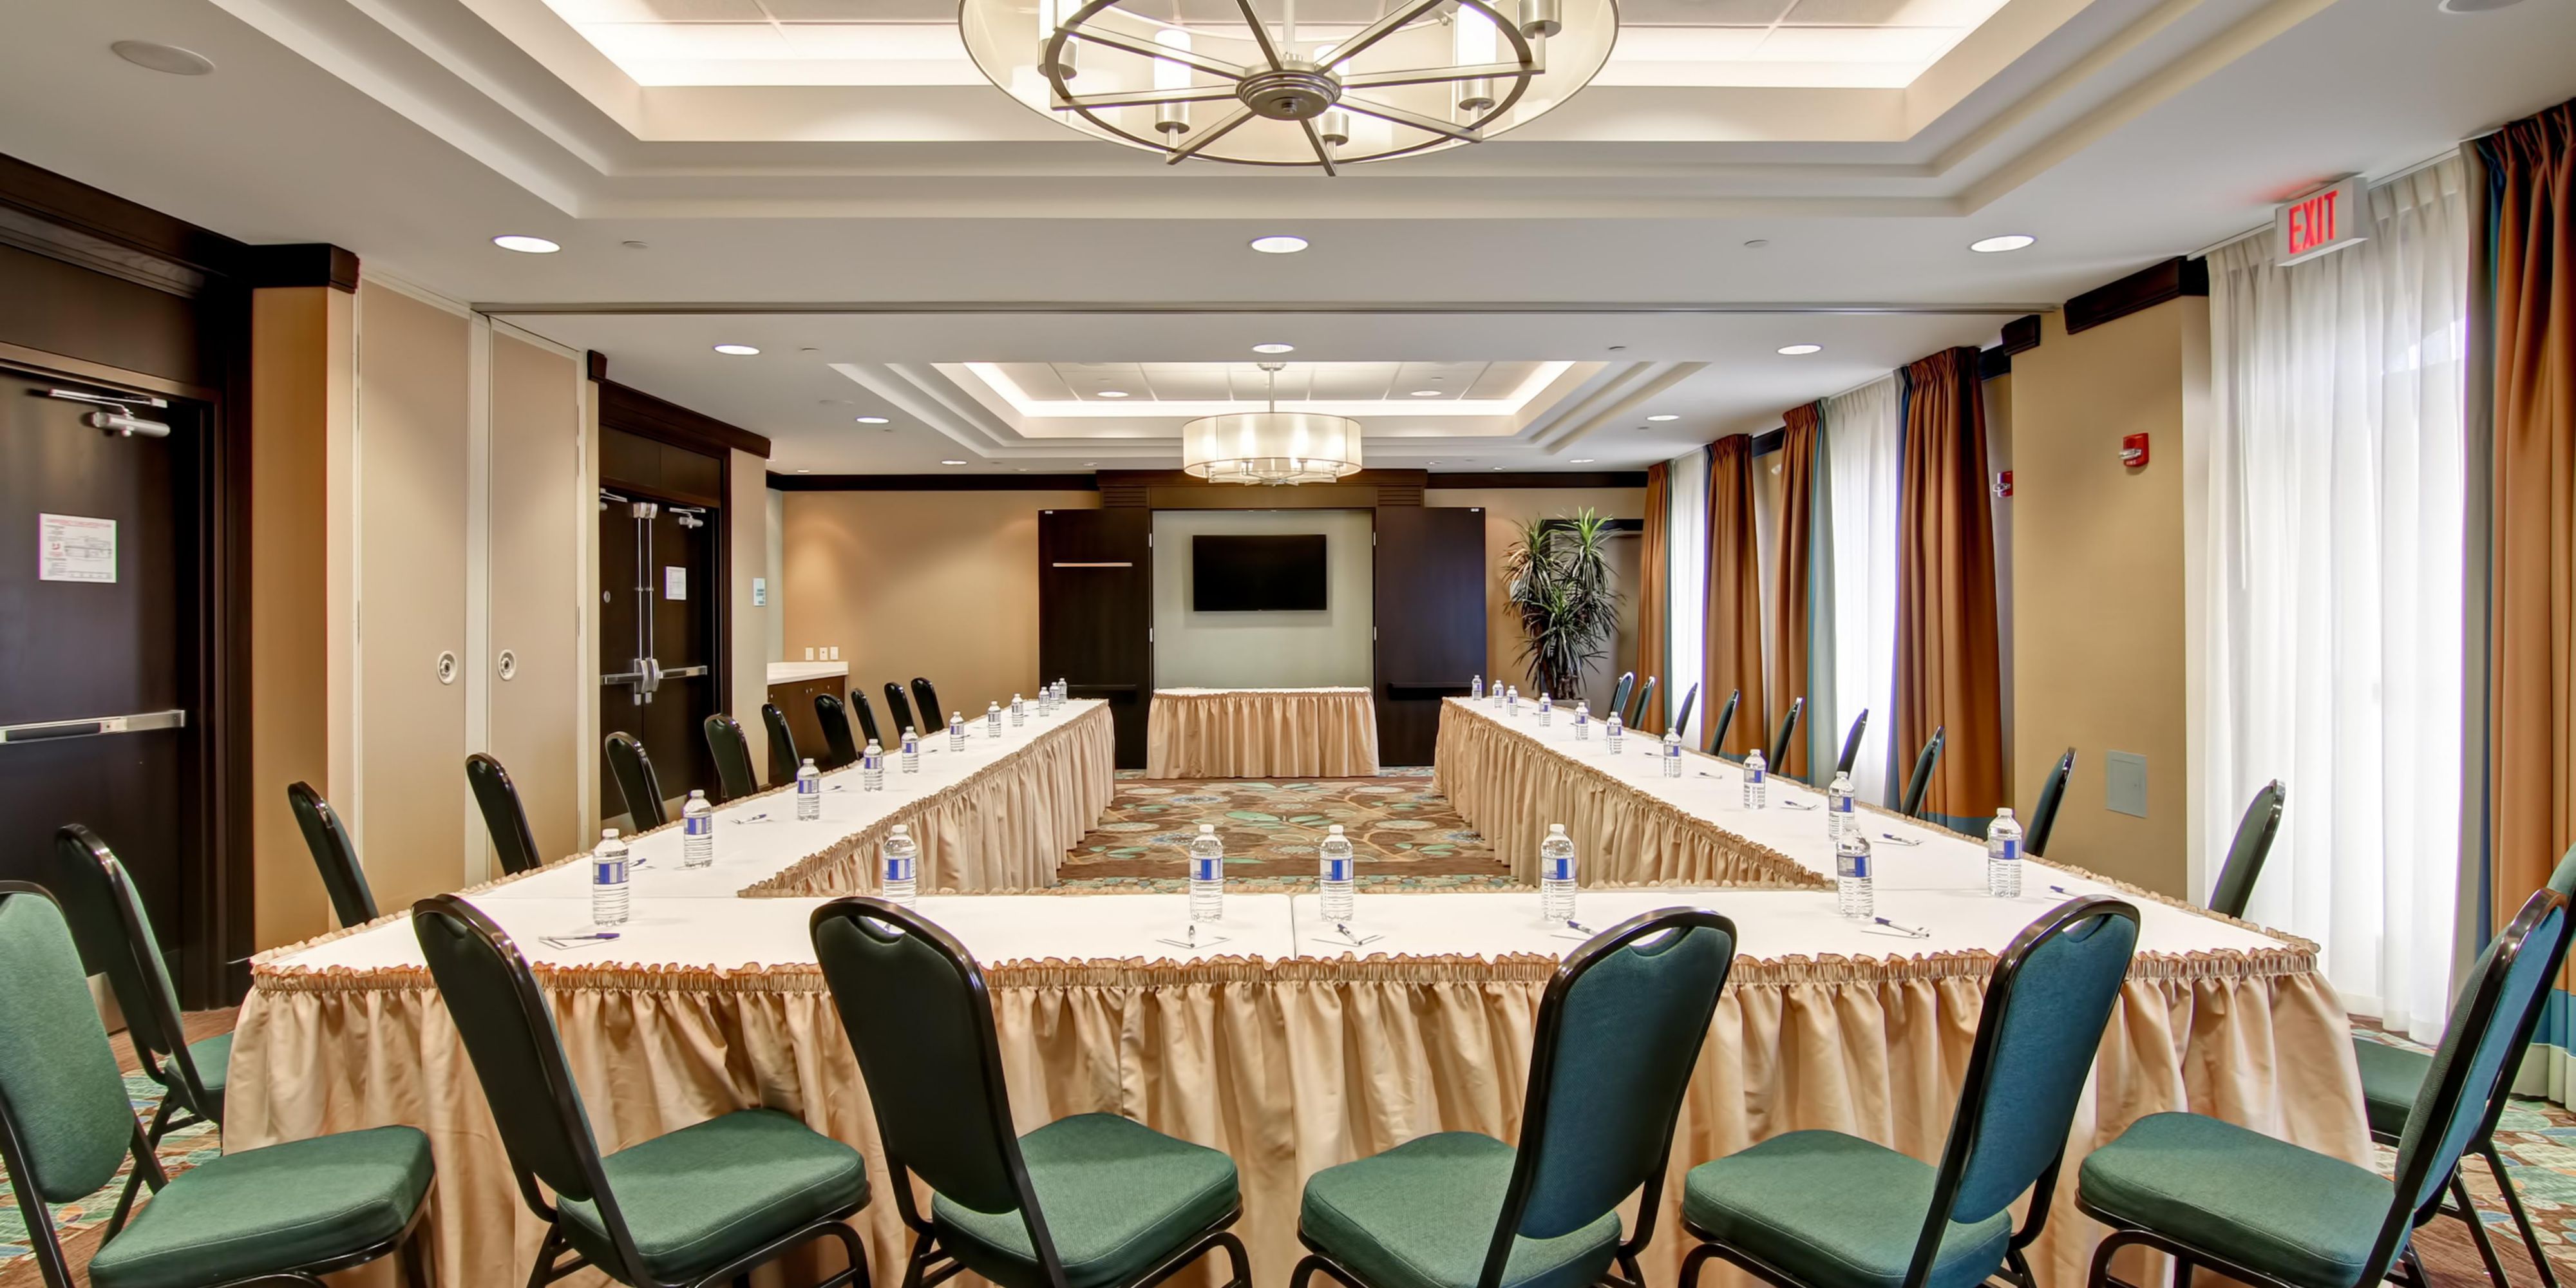 Holiday Inn Express Waterloo/St. Jacobs offers over 1,100 square feet of versatile meeting space boasting large windows with natural light.  Our Benjamin Room is available in a variety of arrangements, with audio-visual aids, and catering options available. Contact us today!